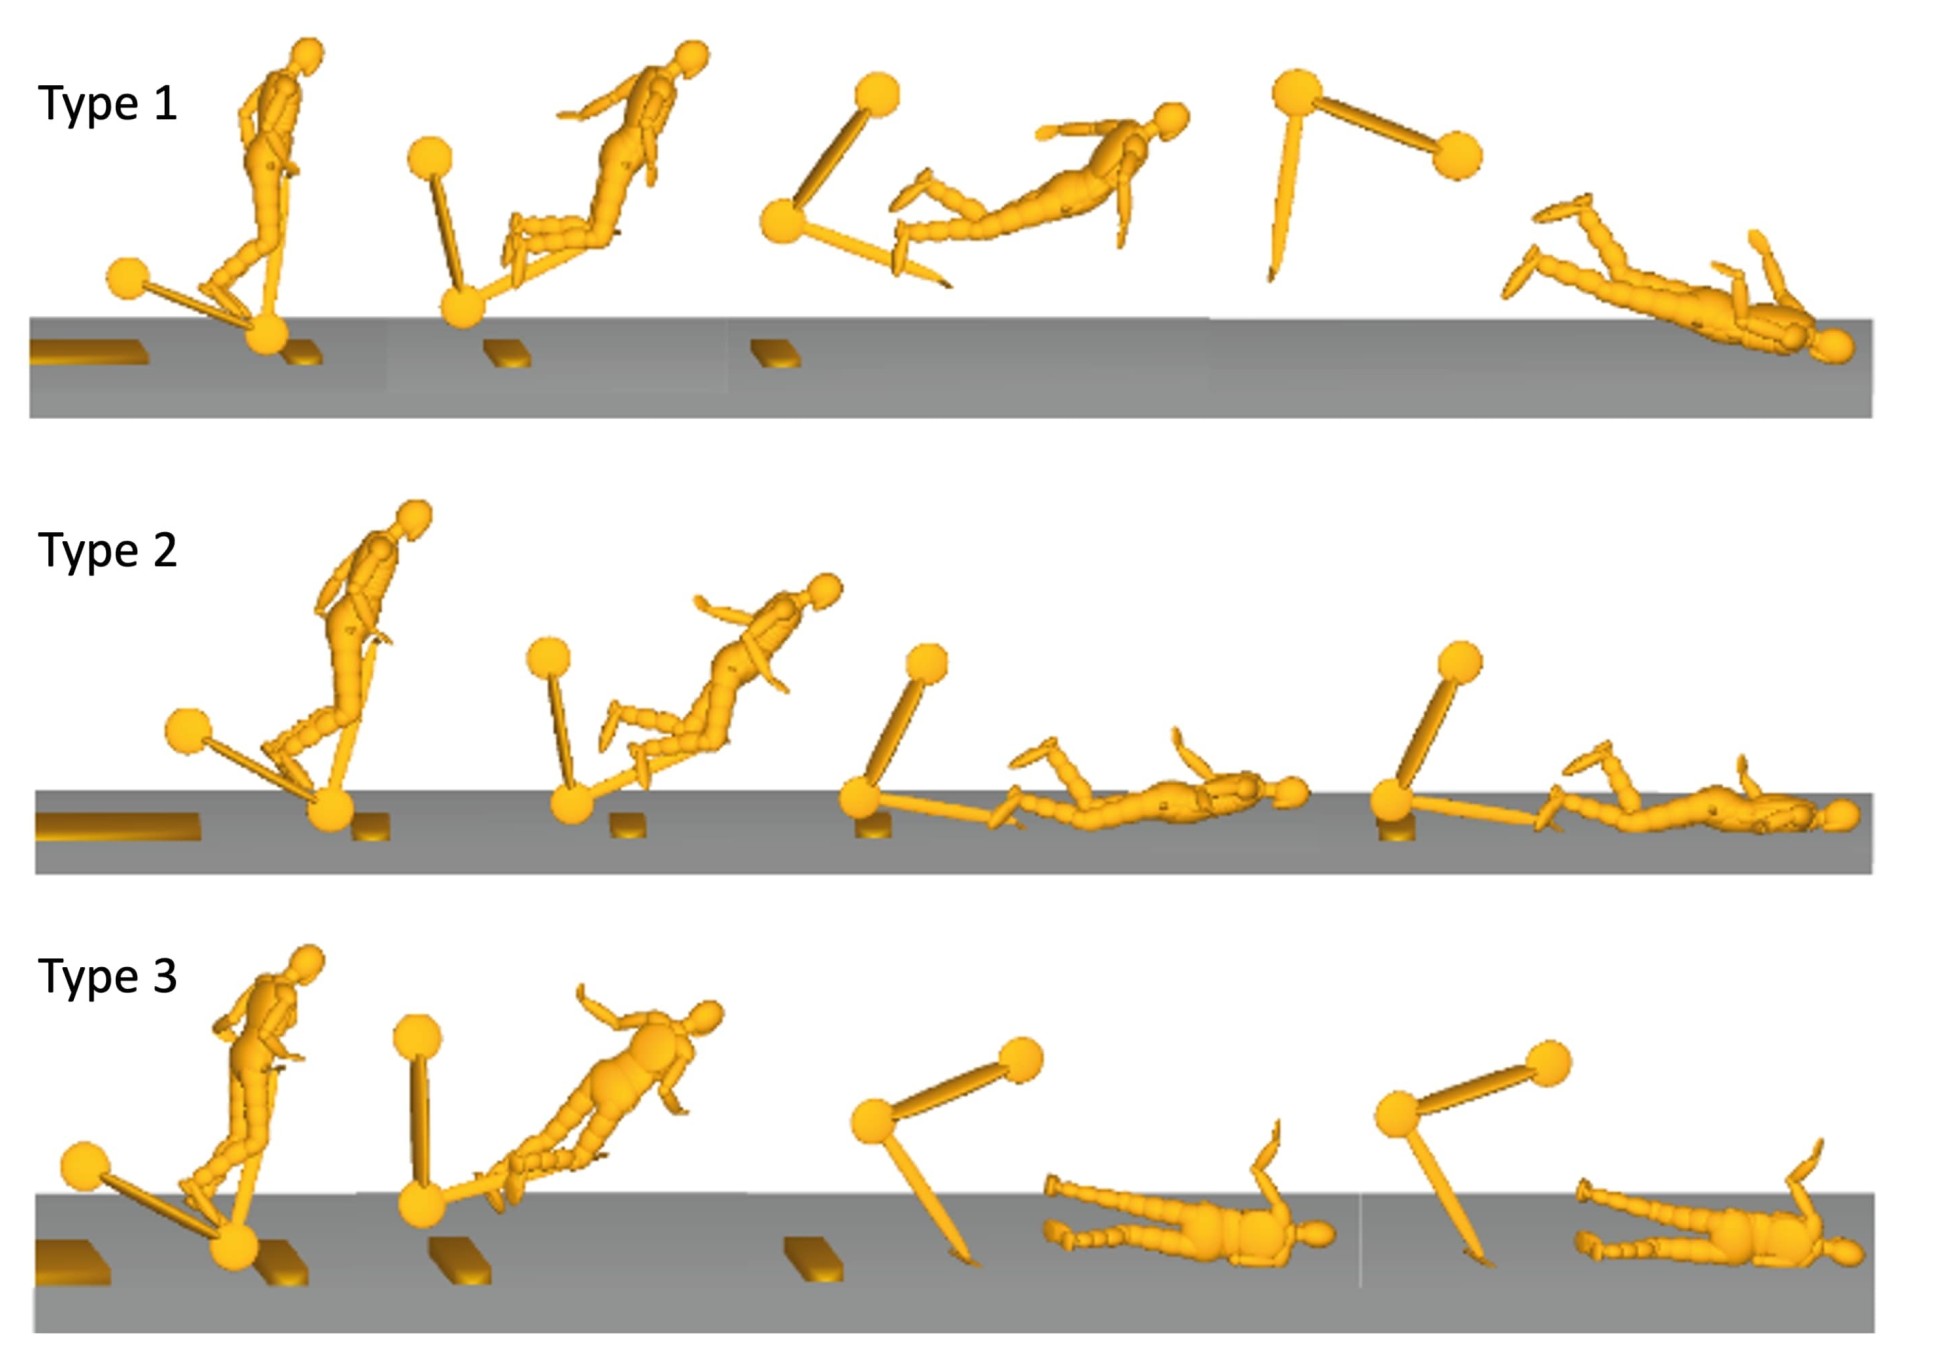 Diagram of falls from e-scooters in three rows - one for each body type. They show the trajectory of each type of fall from scooter to ground.